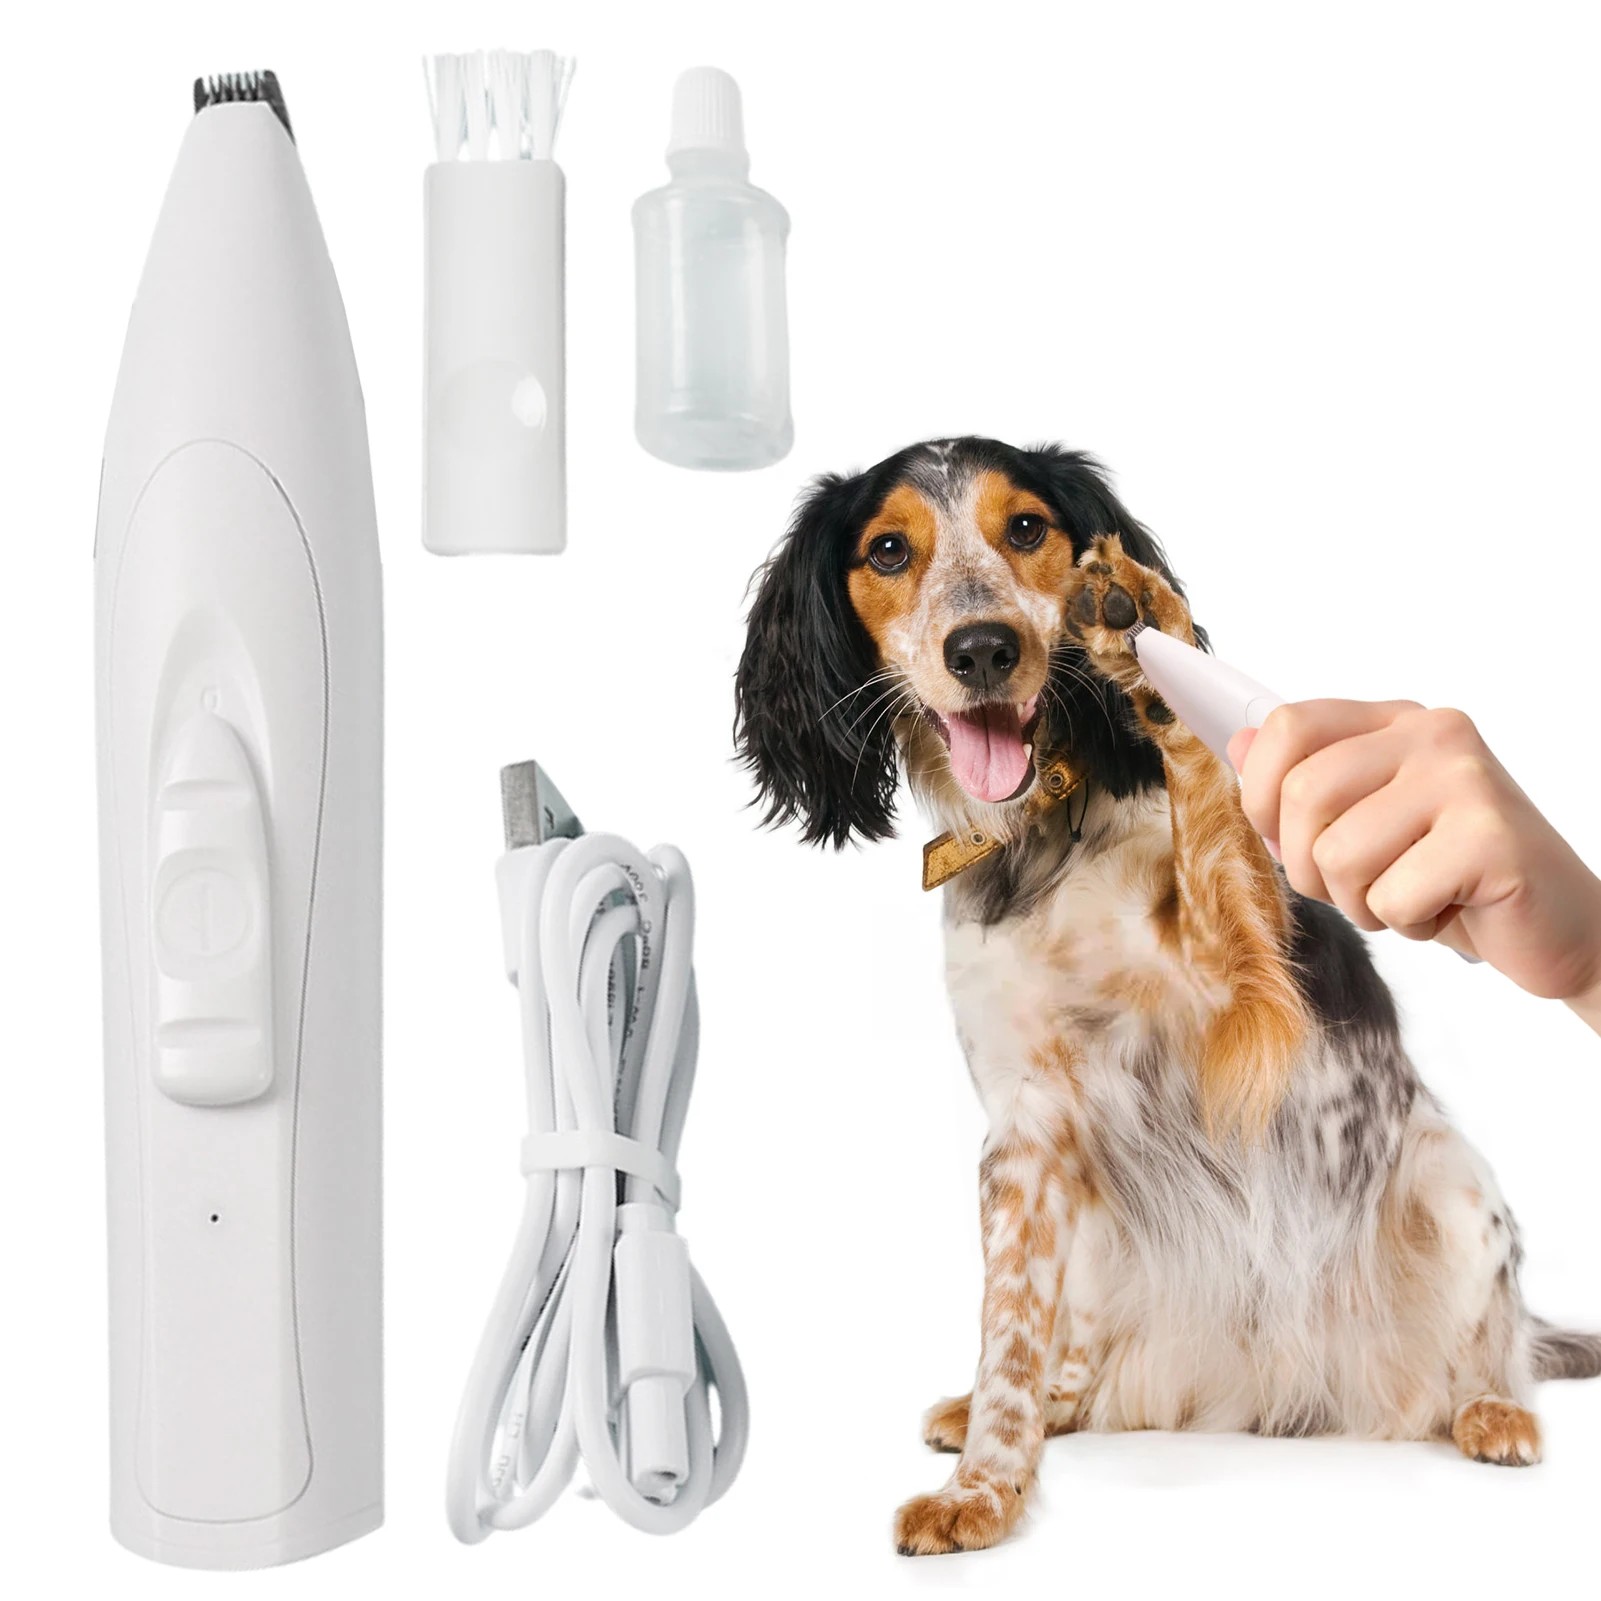 

Dog Grooming Clippers Cordless Cat And Small Dogs Clipper Low Noise Electric Pet Trimmer For Trimming The Hair Around Paws